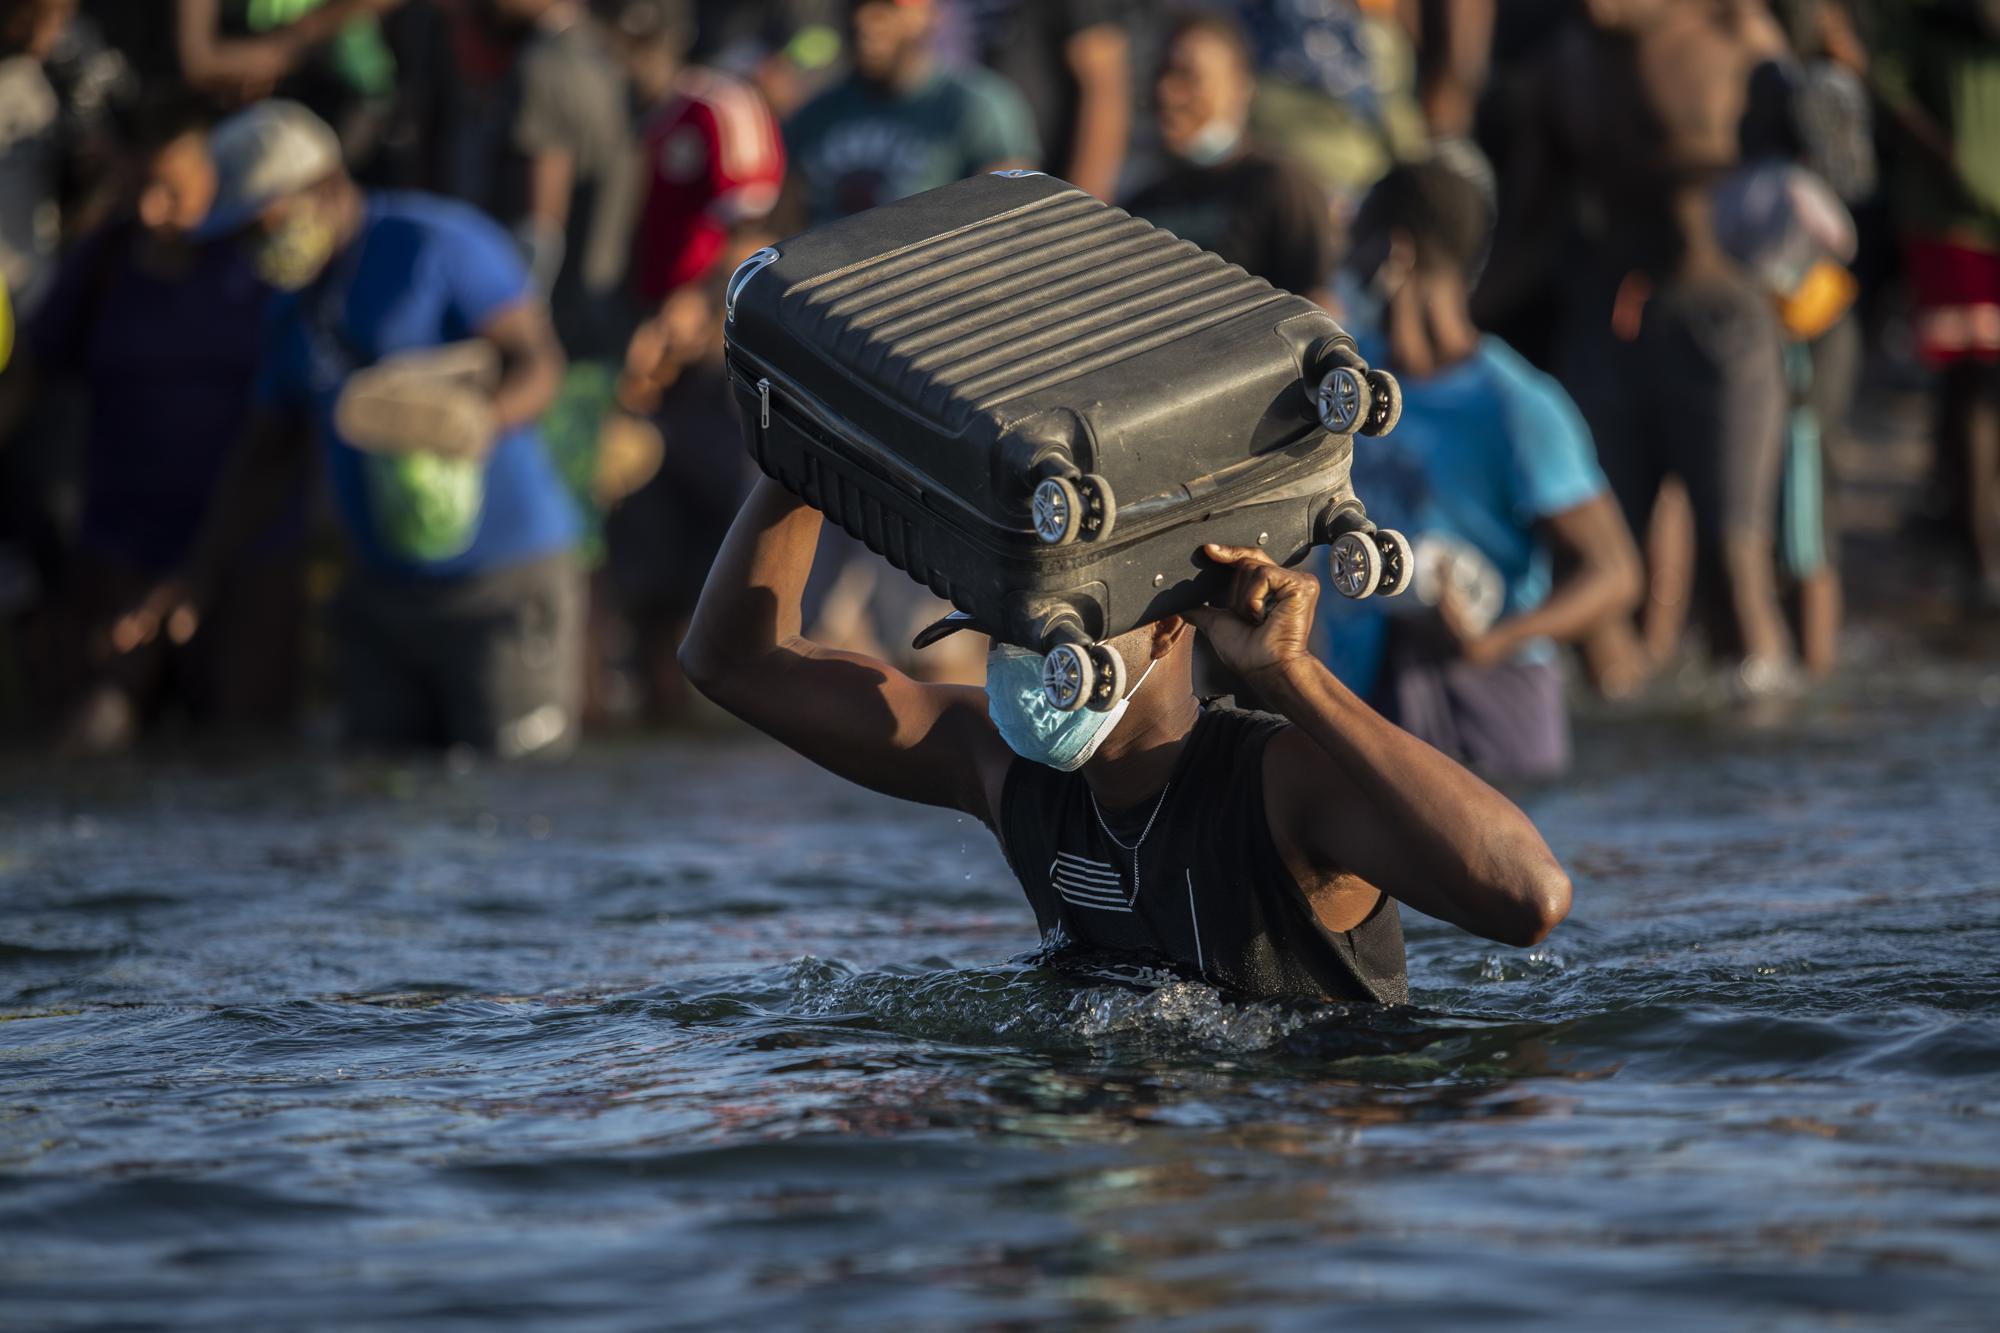 FILE - Migrants, many from Haiti, wade across the Rio Grande river from Del Rio, Texas, to return to Ciudad Acuña, Mexico, Sept. 20, 2021, to avoid deportation from the U.S. The Border Patrol encountered migrants in South Texas more often than ever in June and July, dashing expectations for a common summer slowdown. In September, about 15,000 mostly Haitian refugees were camped under a bridge in the small border town of Del Rio, Texas. (AP Photo/Felix Marquez, File)